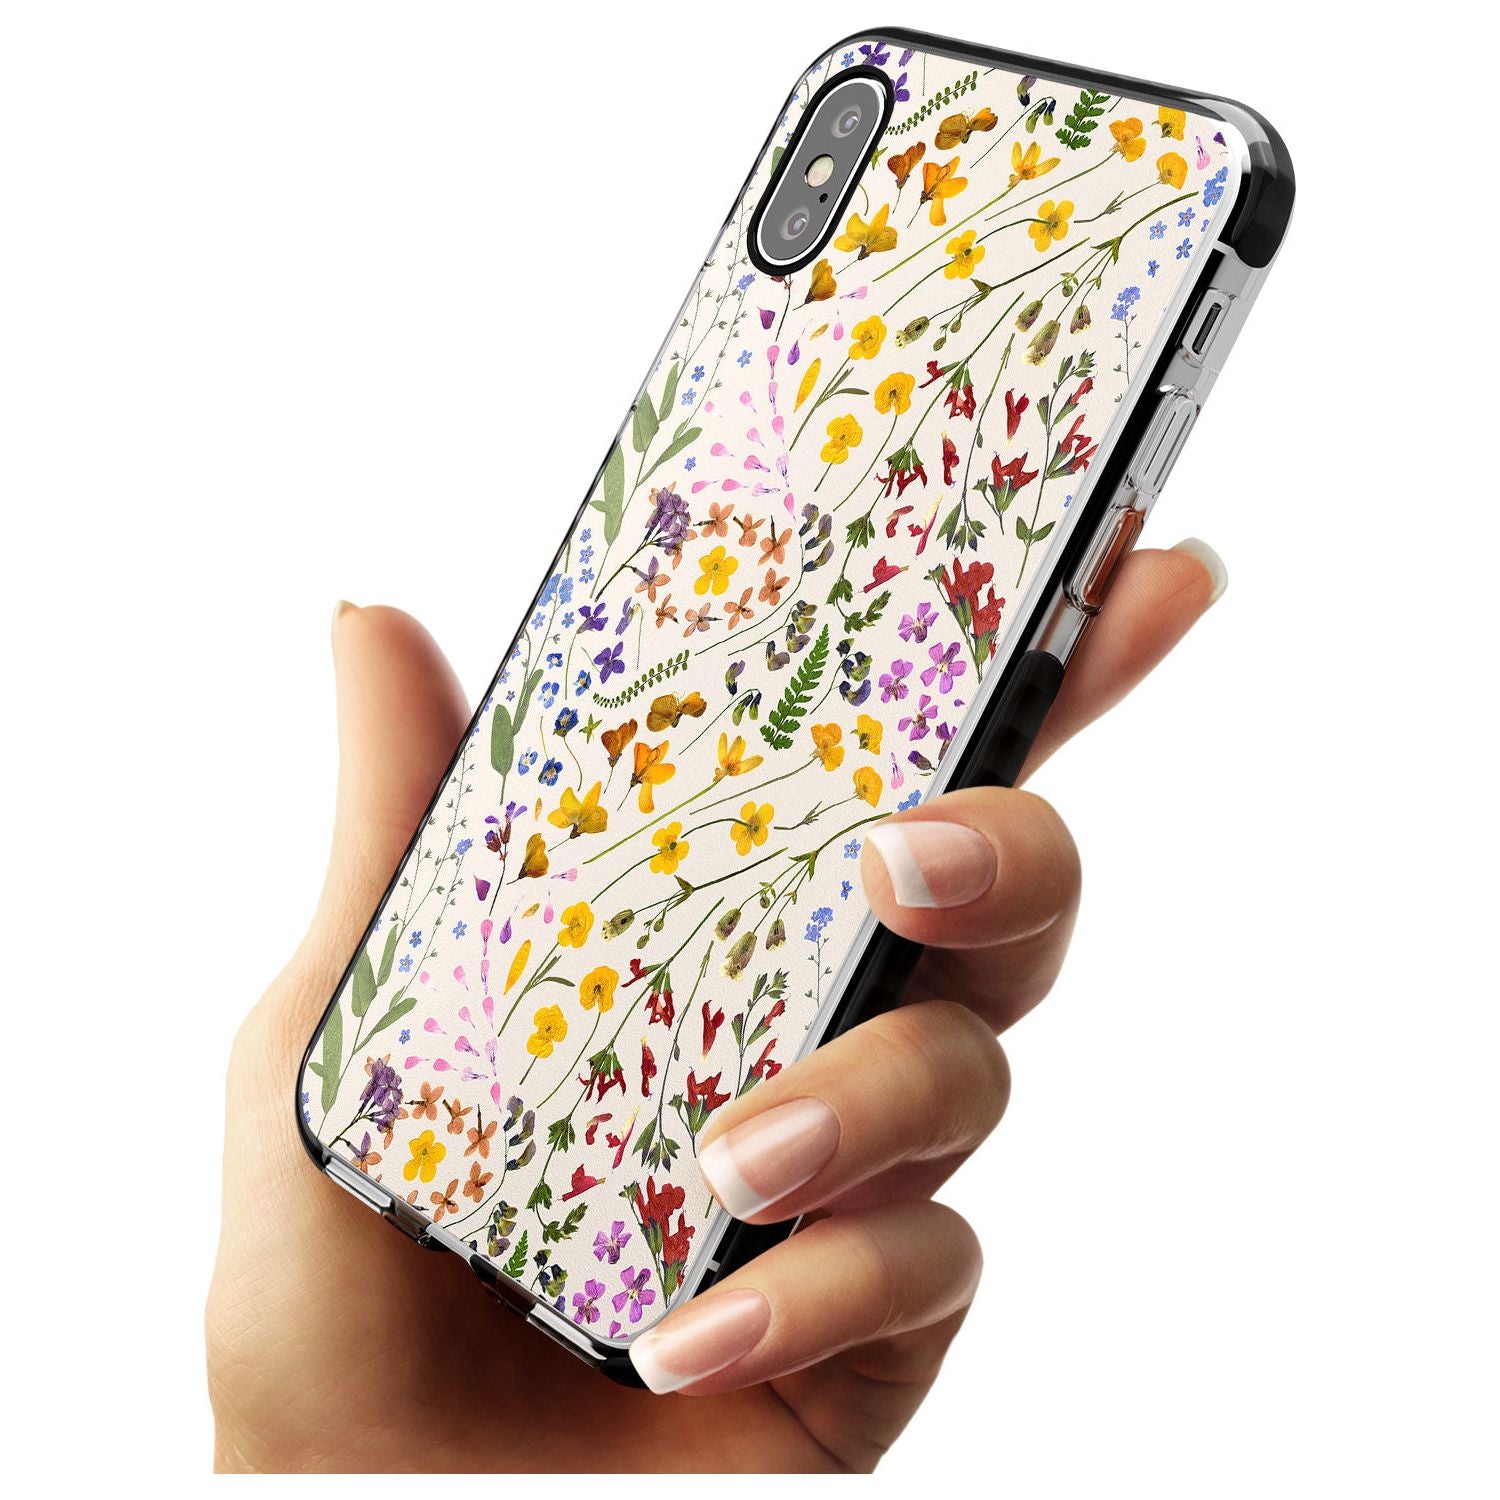 Wildflower & Leaves Cluster Design - Cream Black Impact Phone Case for iPhone X XS Max XR